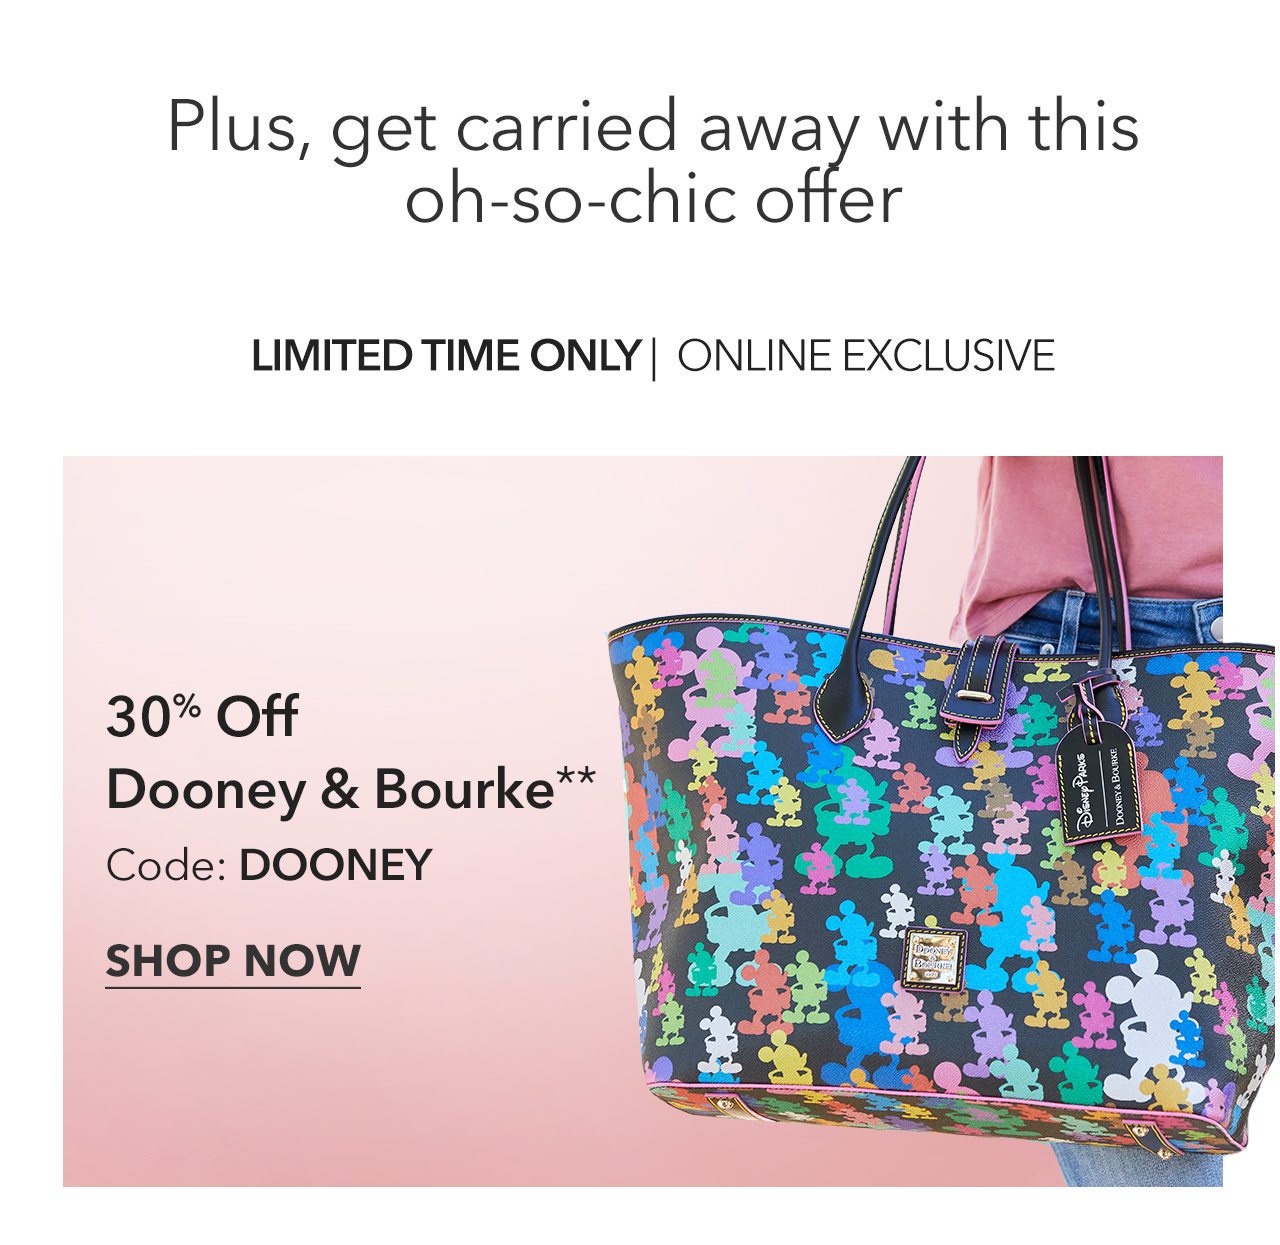 Plus, get carried away with this oh-so-chic offer | Limited Time Only - Online Exclusive | 30% Off Dooney & Bourke | Code: DOONEY | Shop Now